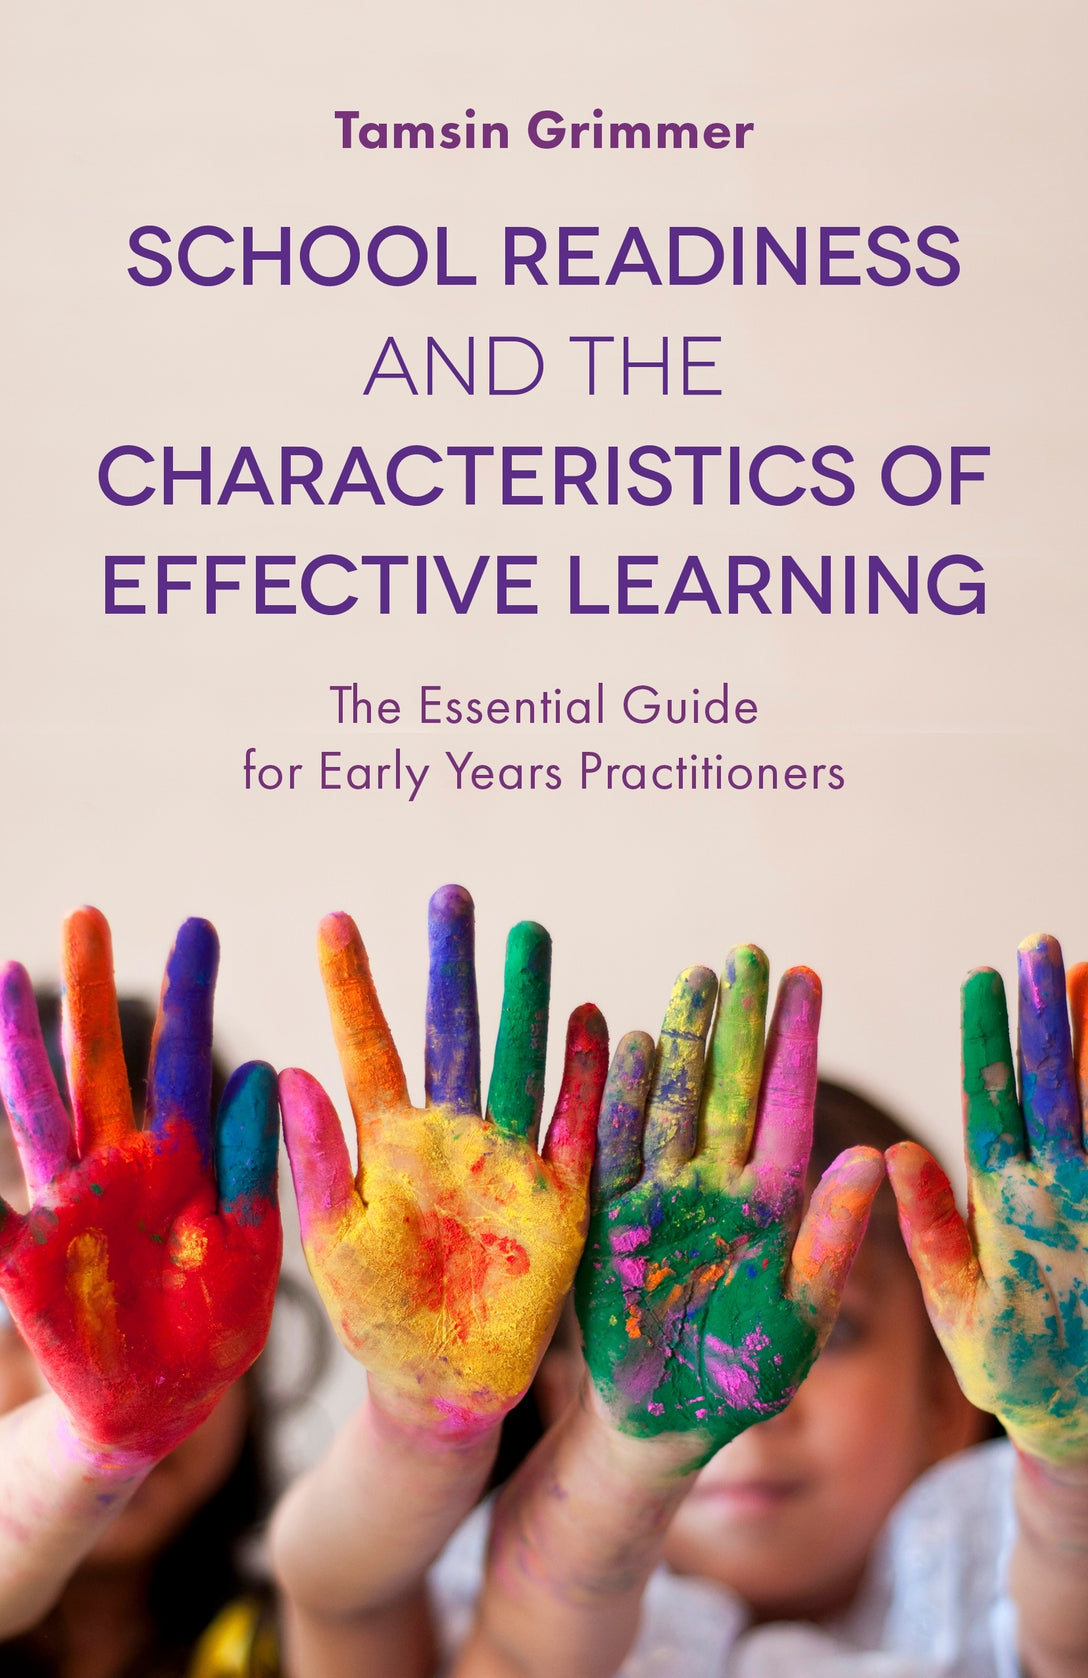 School Readiness and the Characteristics of Effective Learning by Tamsin Grimmer